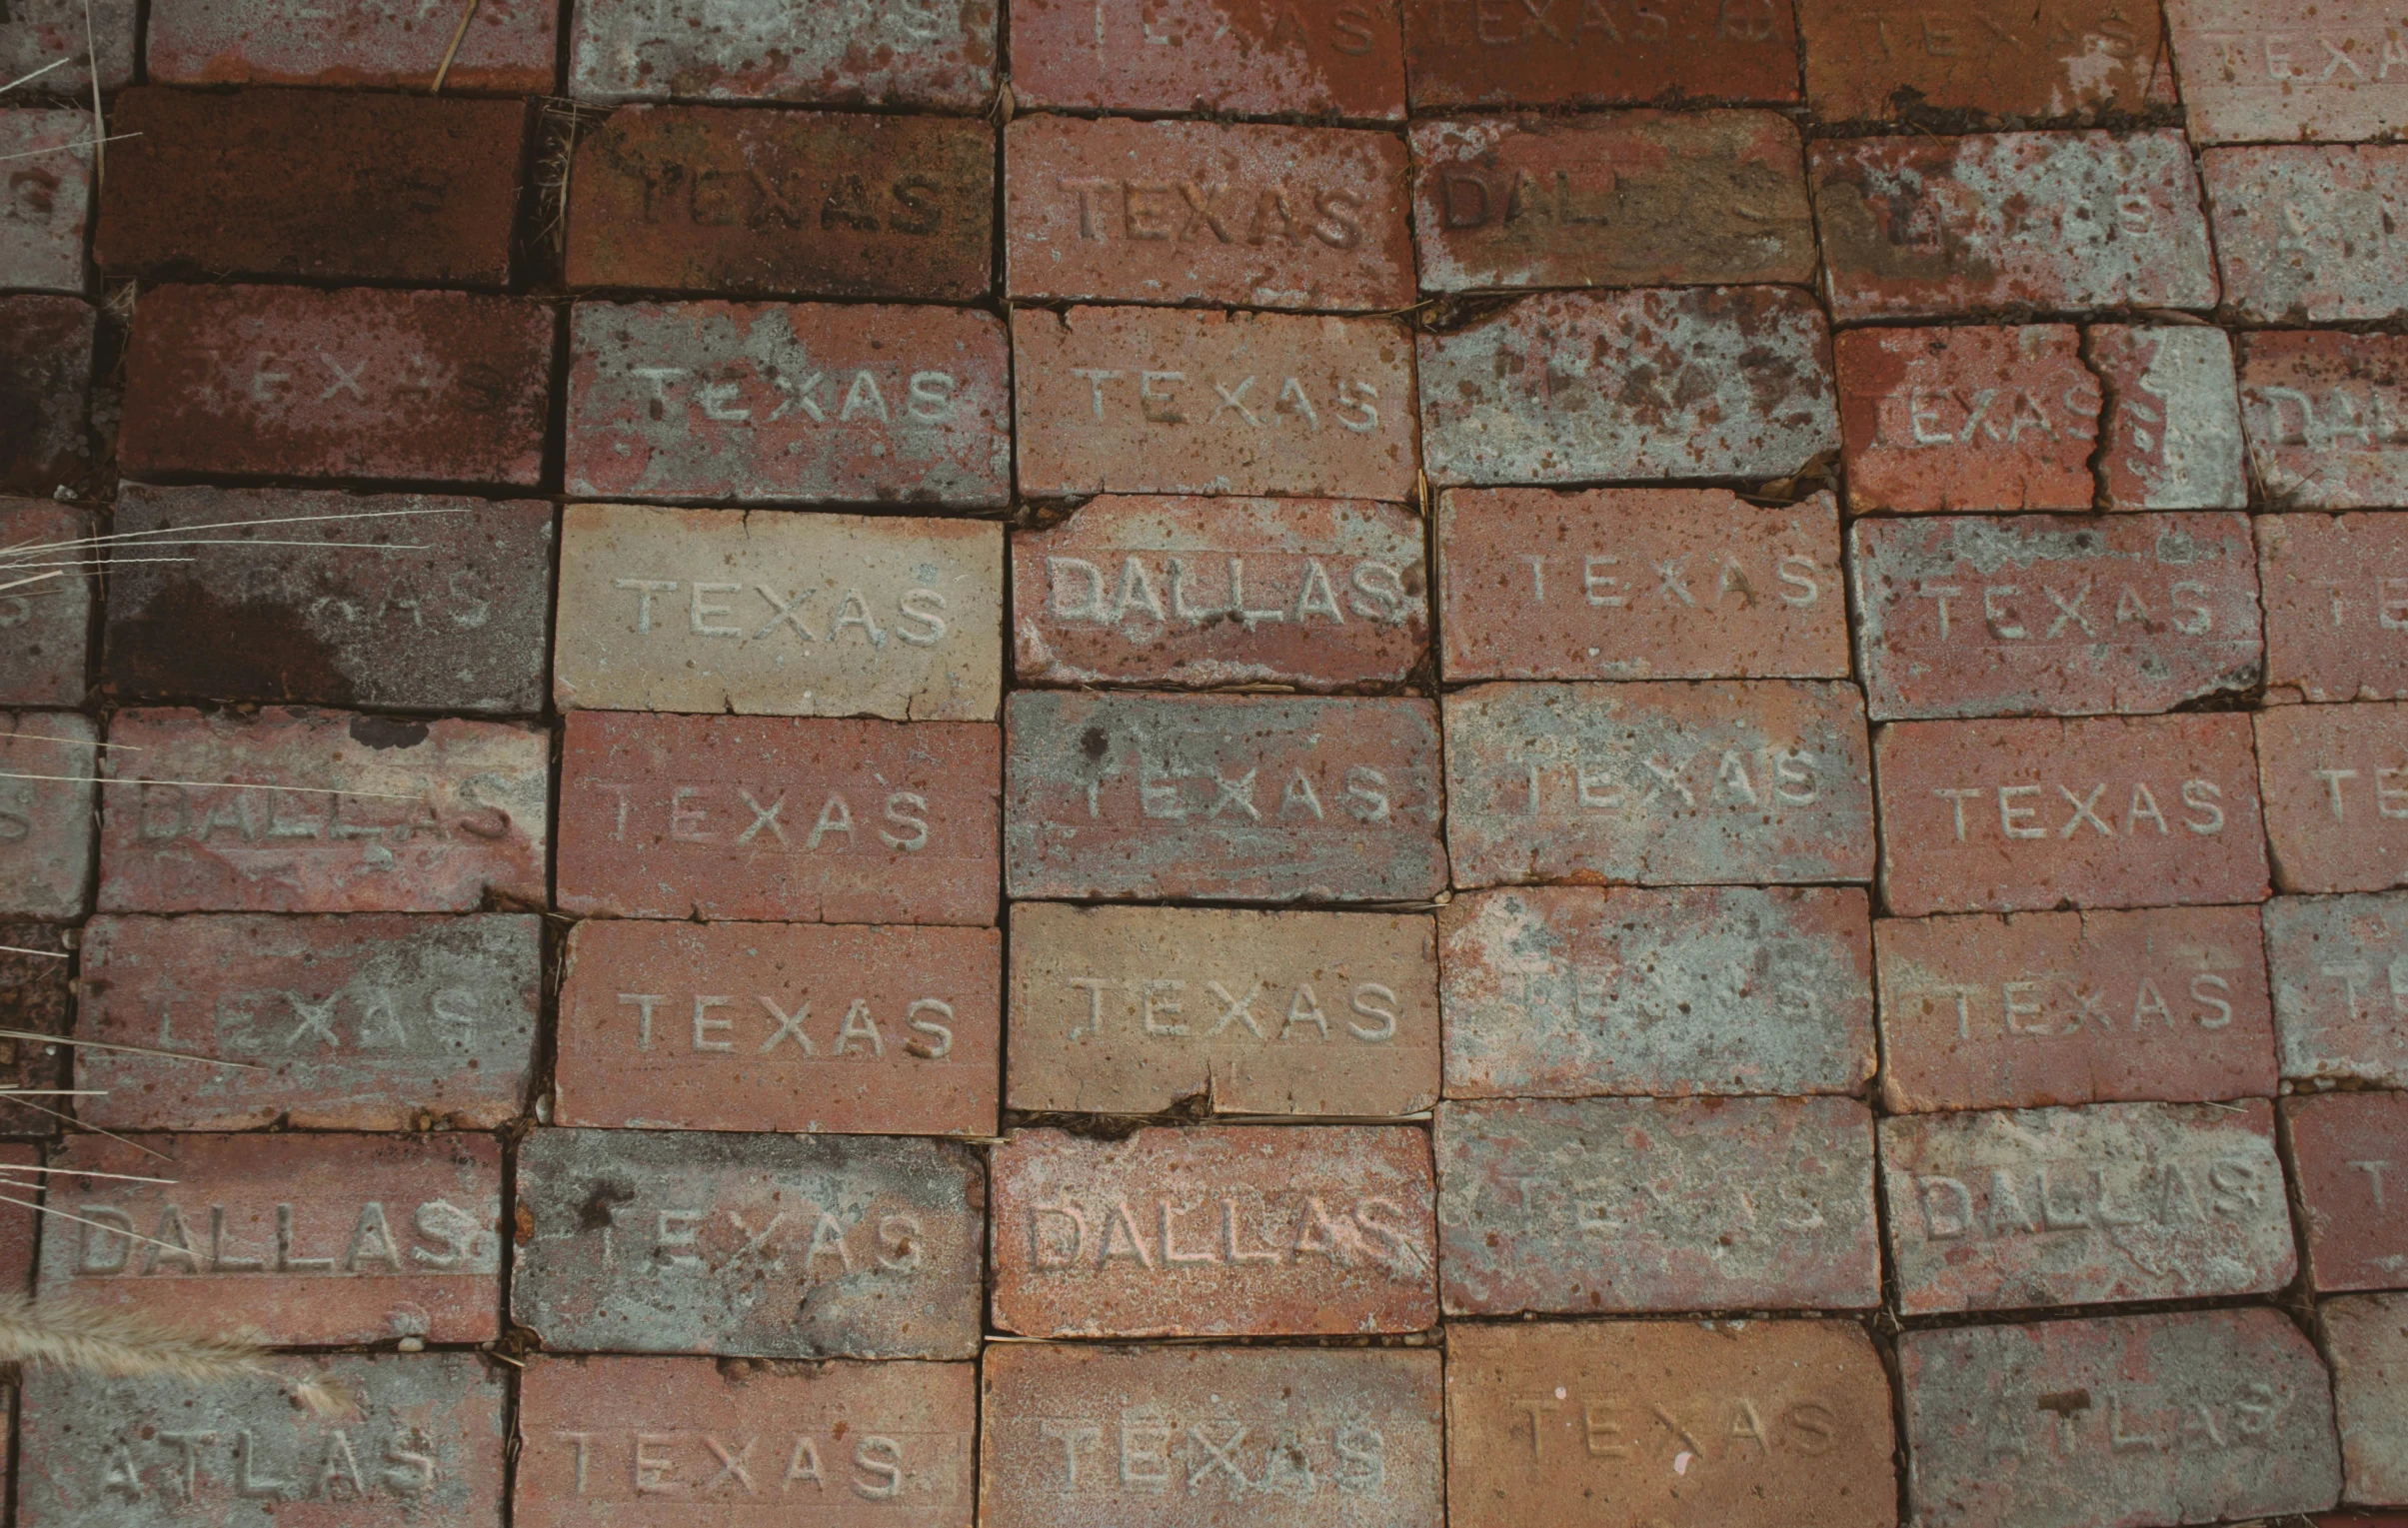 the old bricks with signs are written on